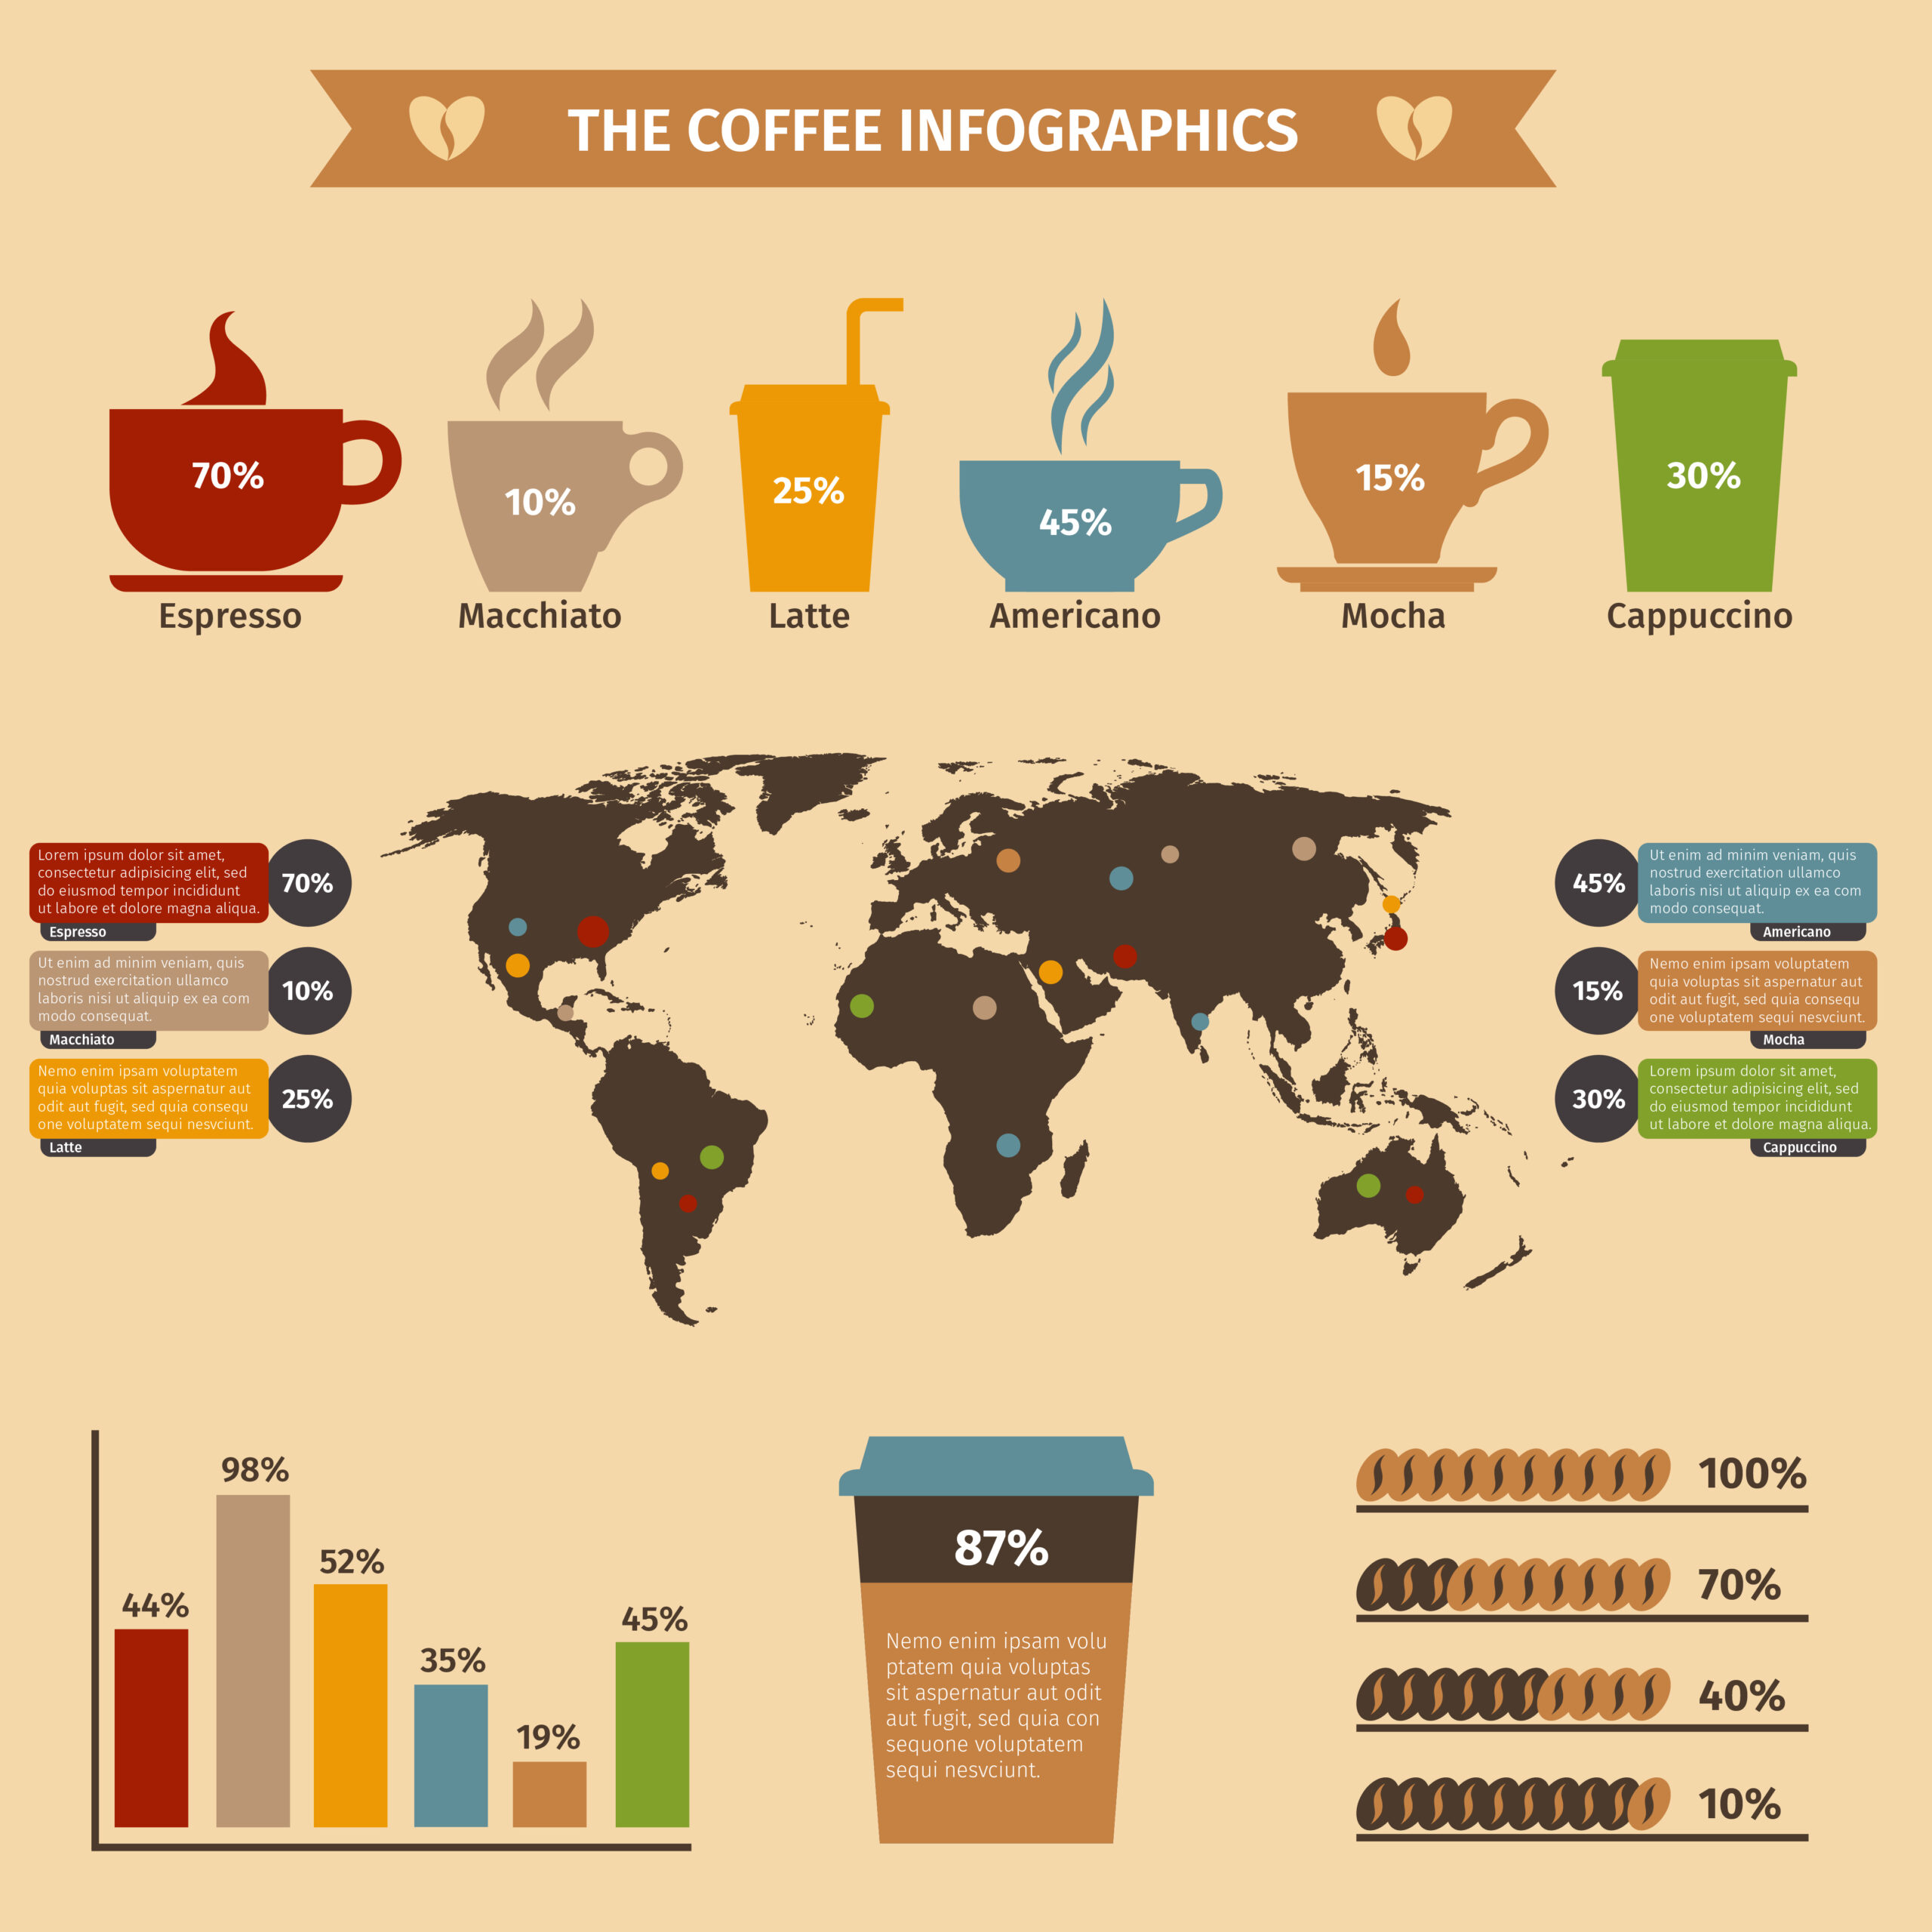 Coffee Infographic By Tasty Coffee Maker 2020 [Infographic]